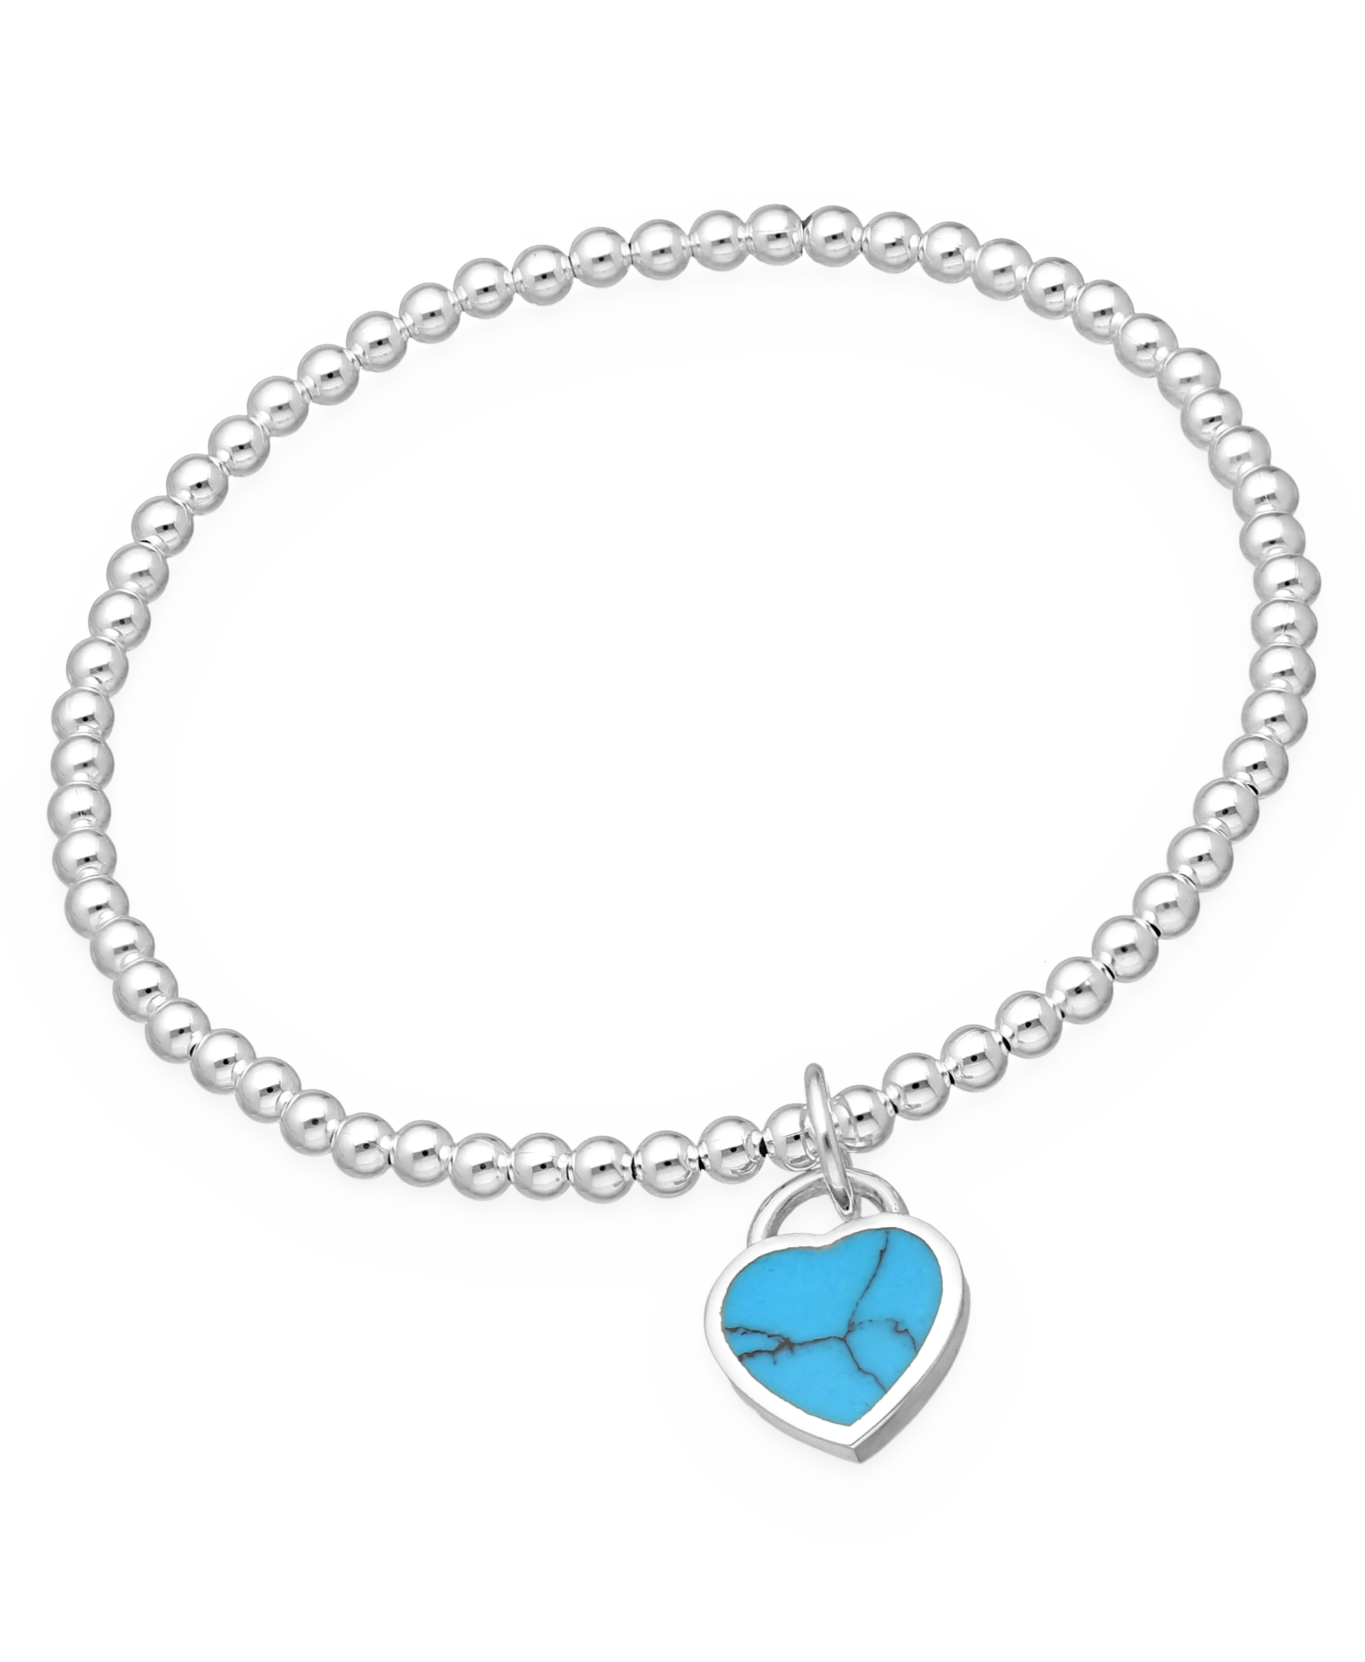 Sterling Silver Elastic Ball Bracelet with Turquoise Heart